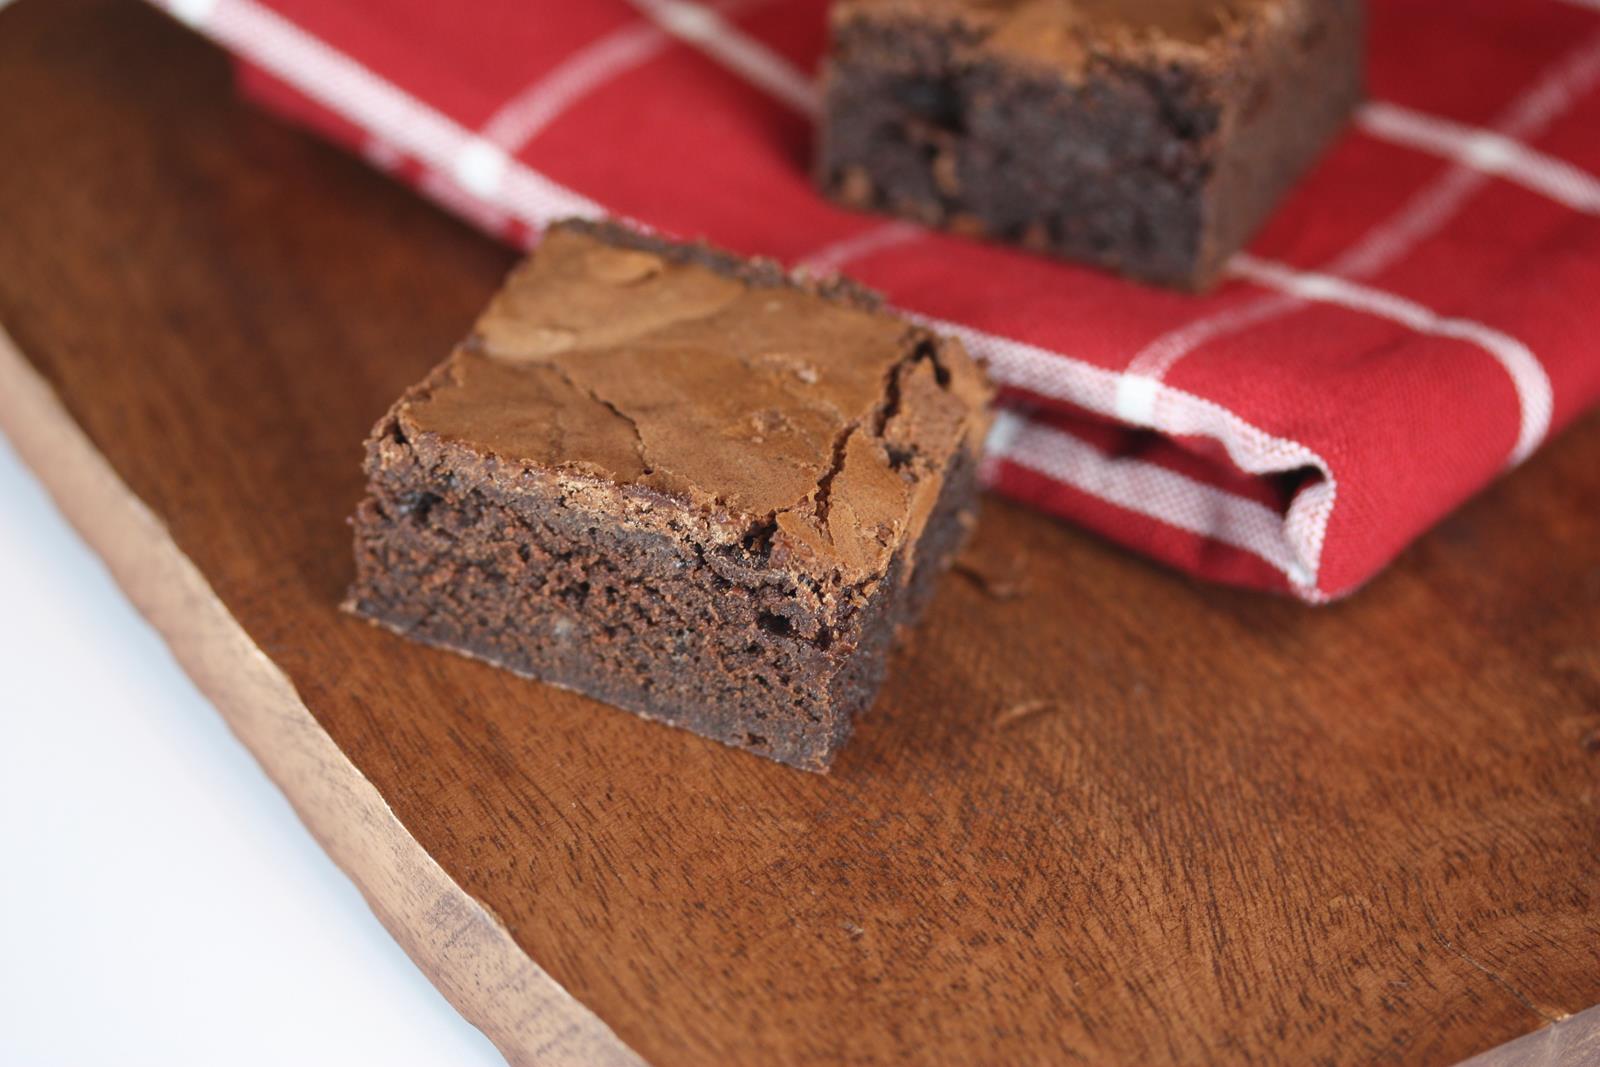 gluten free brownie on board with red napkin